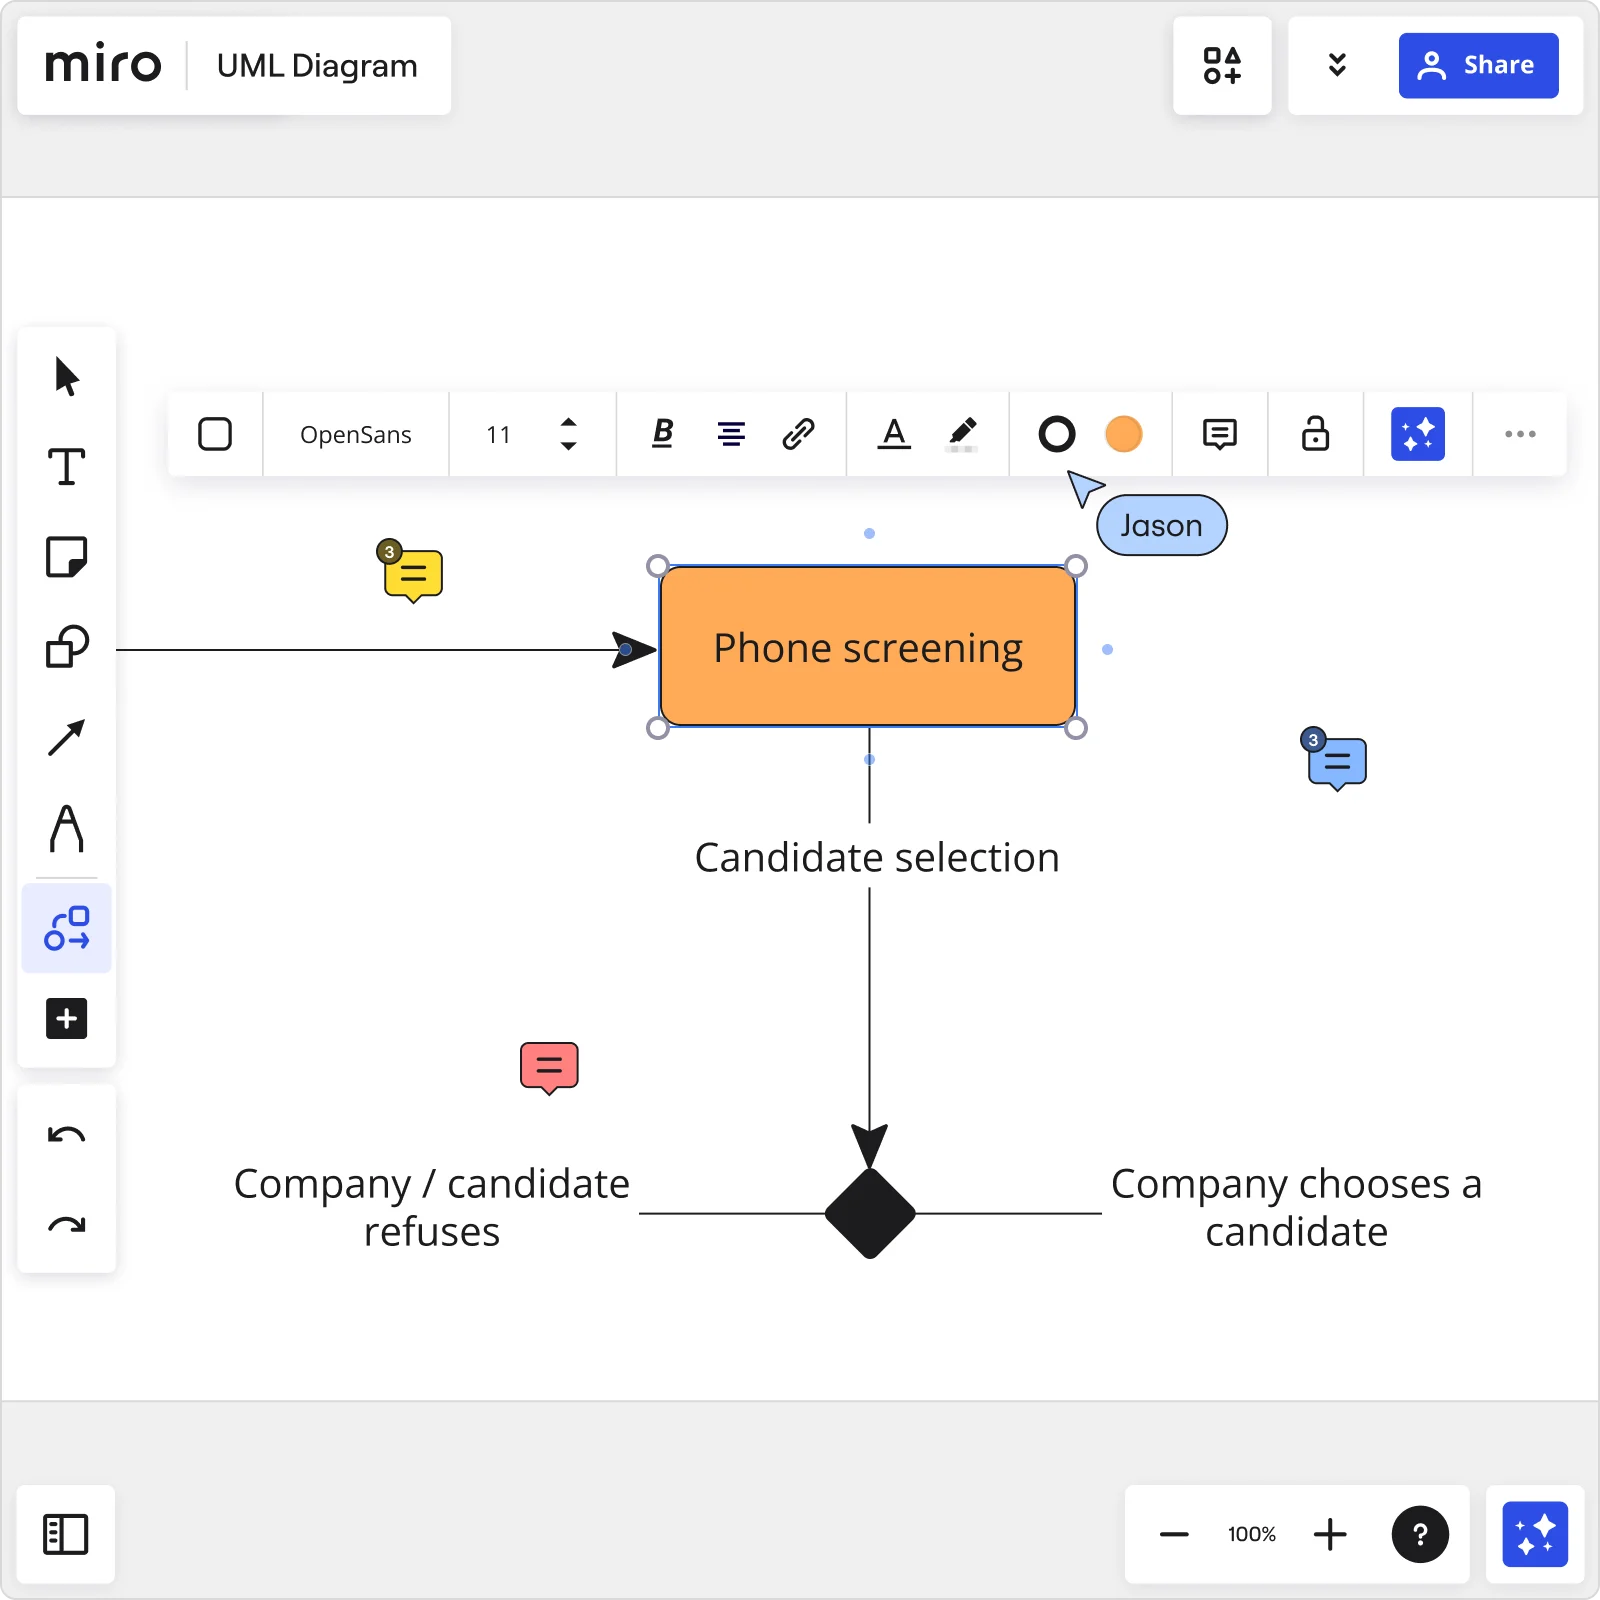 An image showing how to create a UML state machine diagram online using Miro